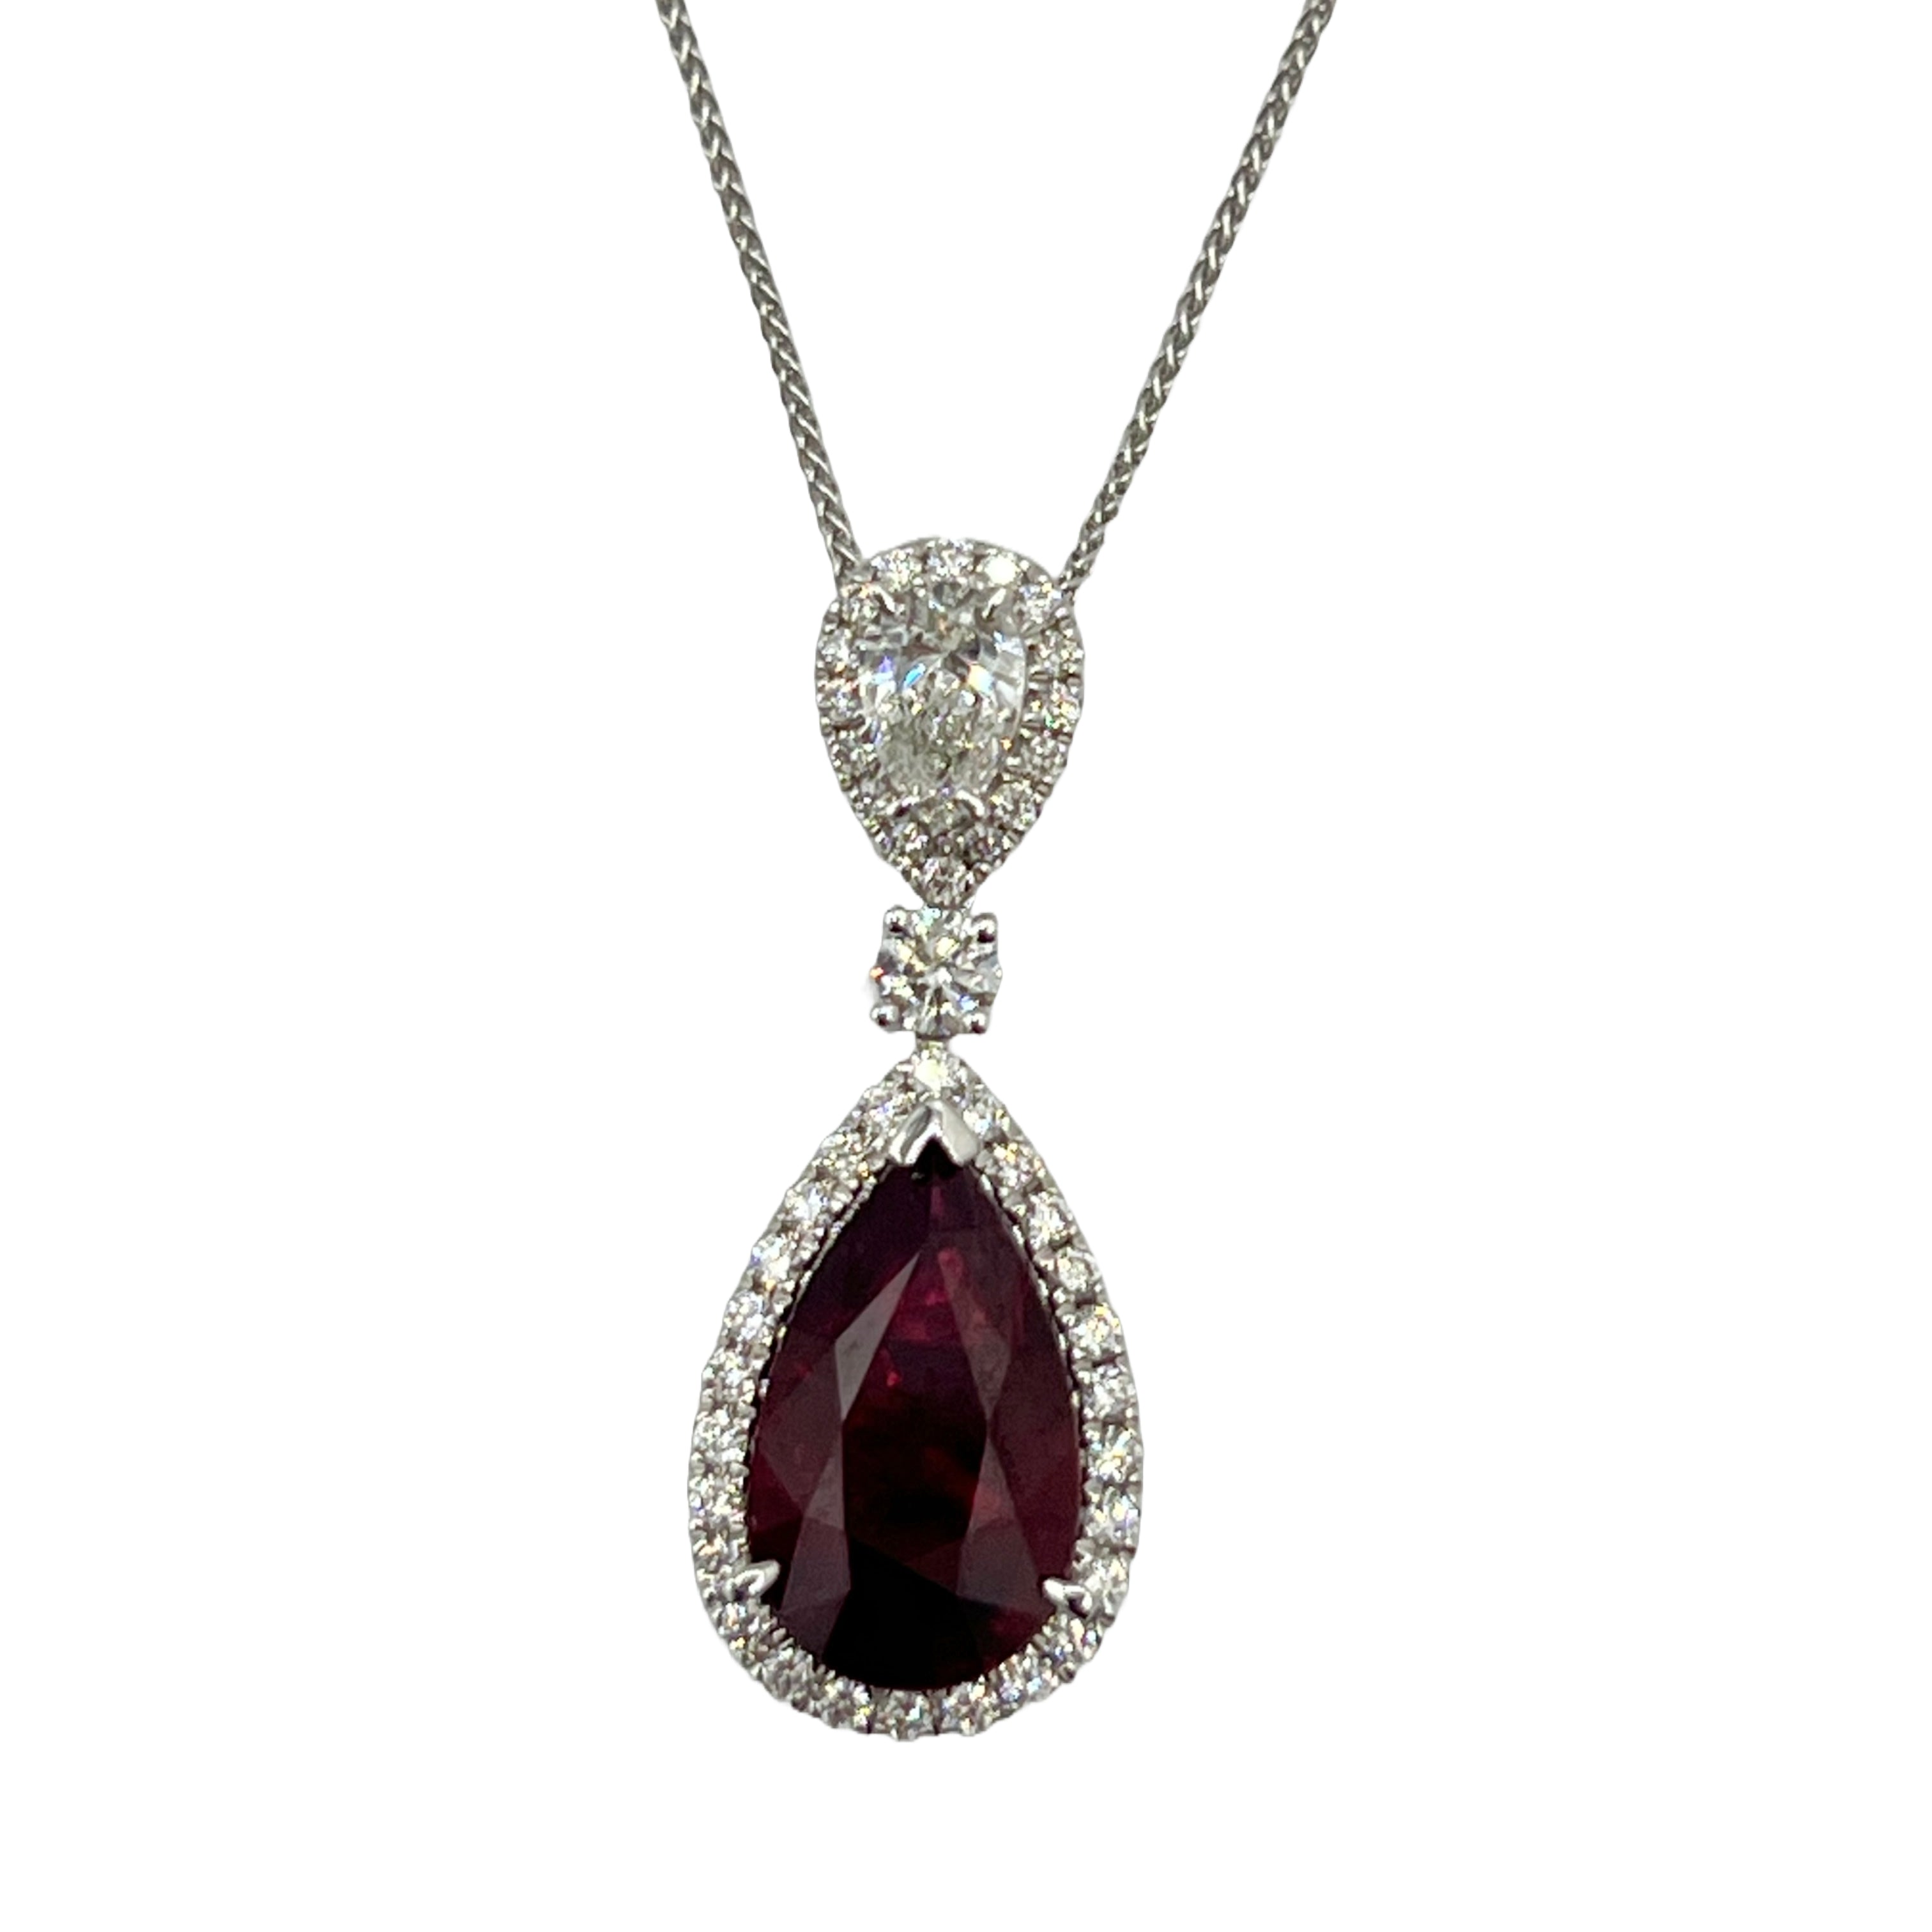 Pendant-18KW/3.5G 1RUBY-4.69CT 1PR-0.38CT 43RD-0.48CT GIA2225516475